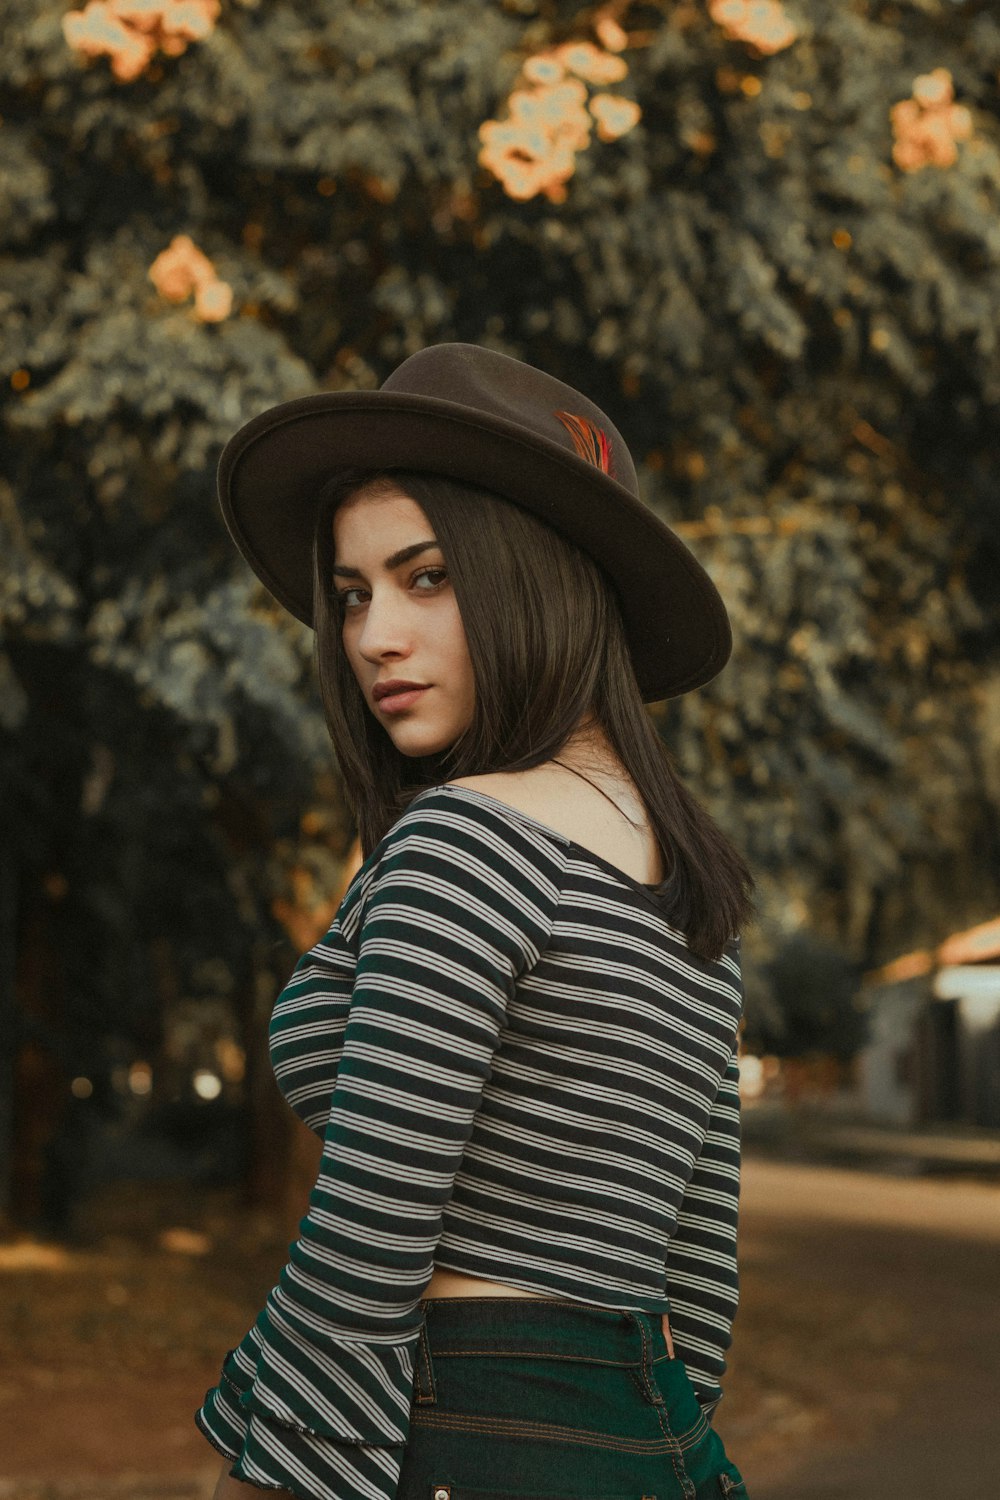 woman wearing gray and black striped shirt and black hat near green tree